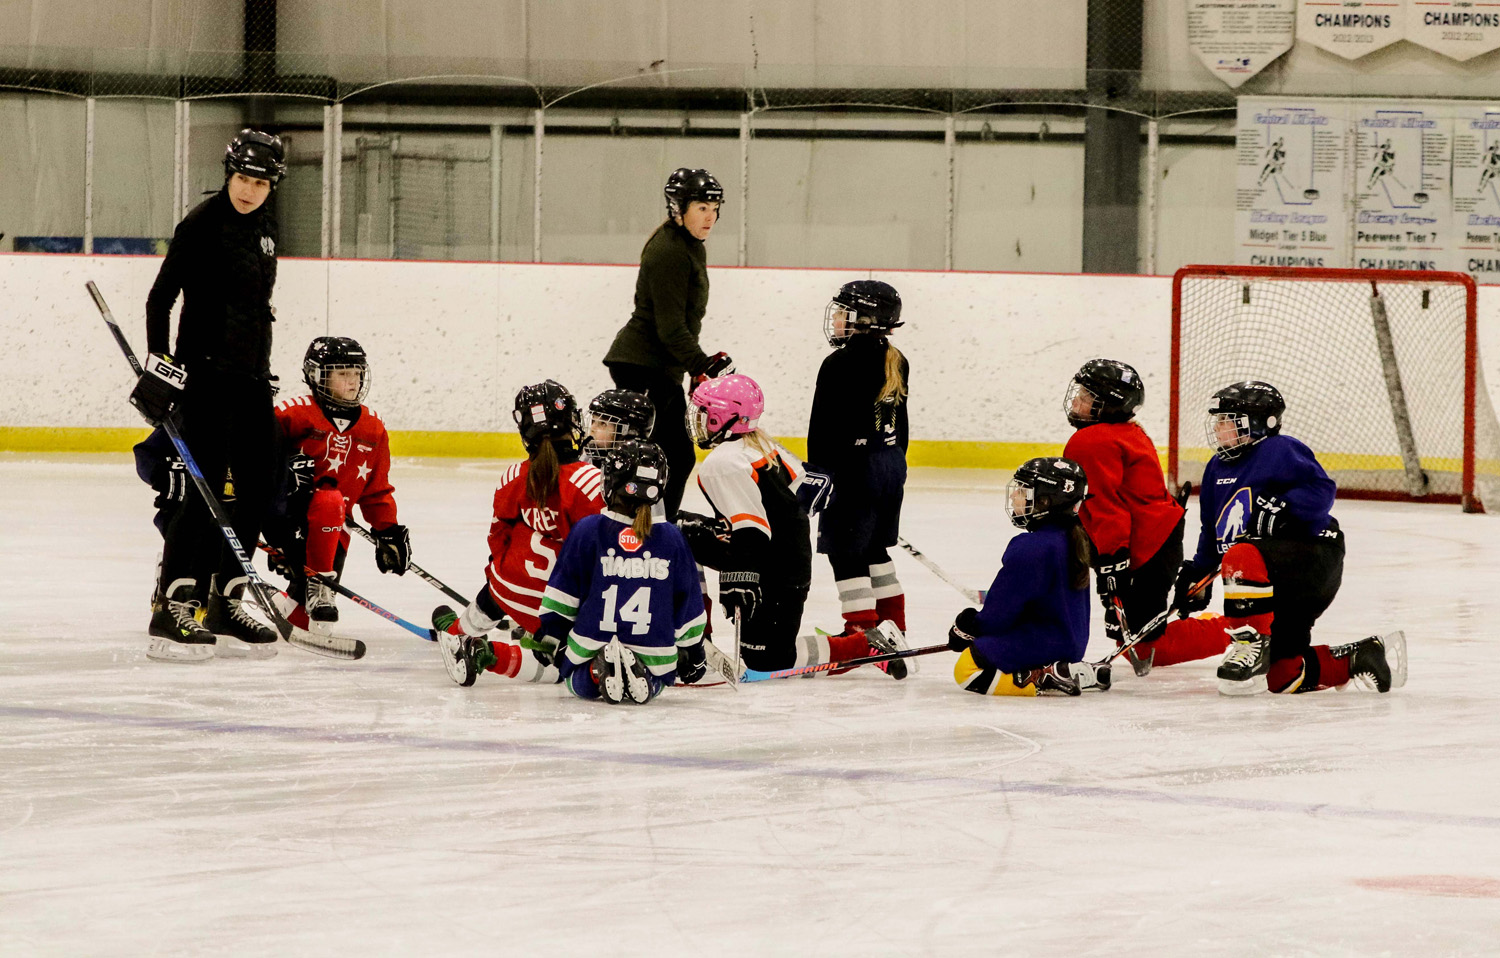 Chestermere Minor Hockey encouraging female athletes to continue playing hockey pic 2